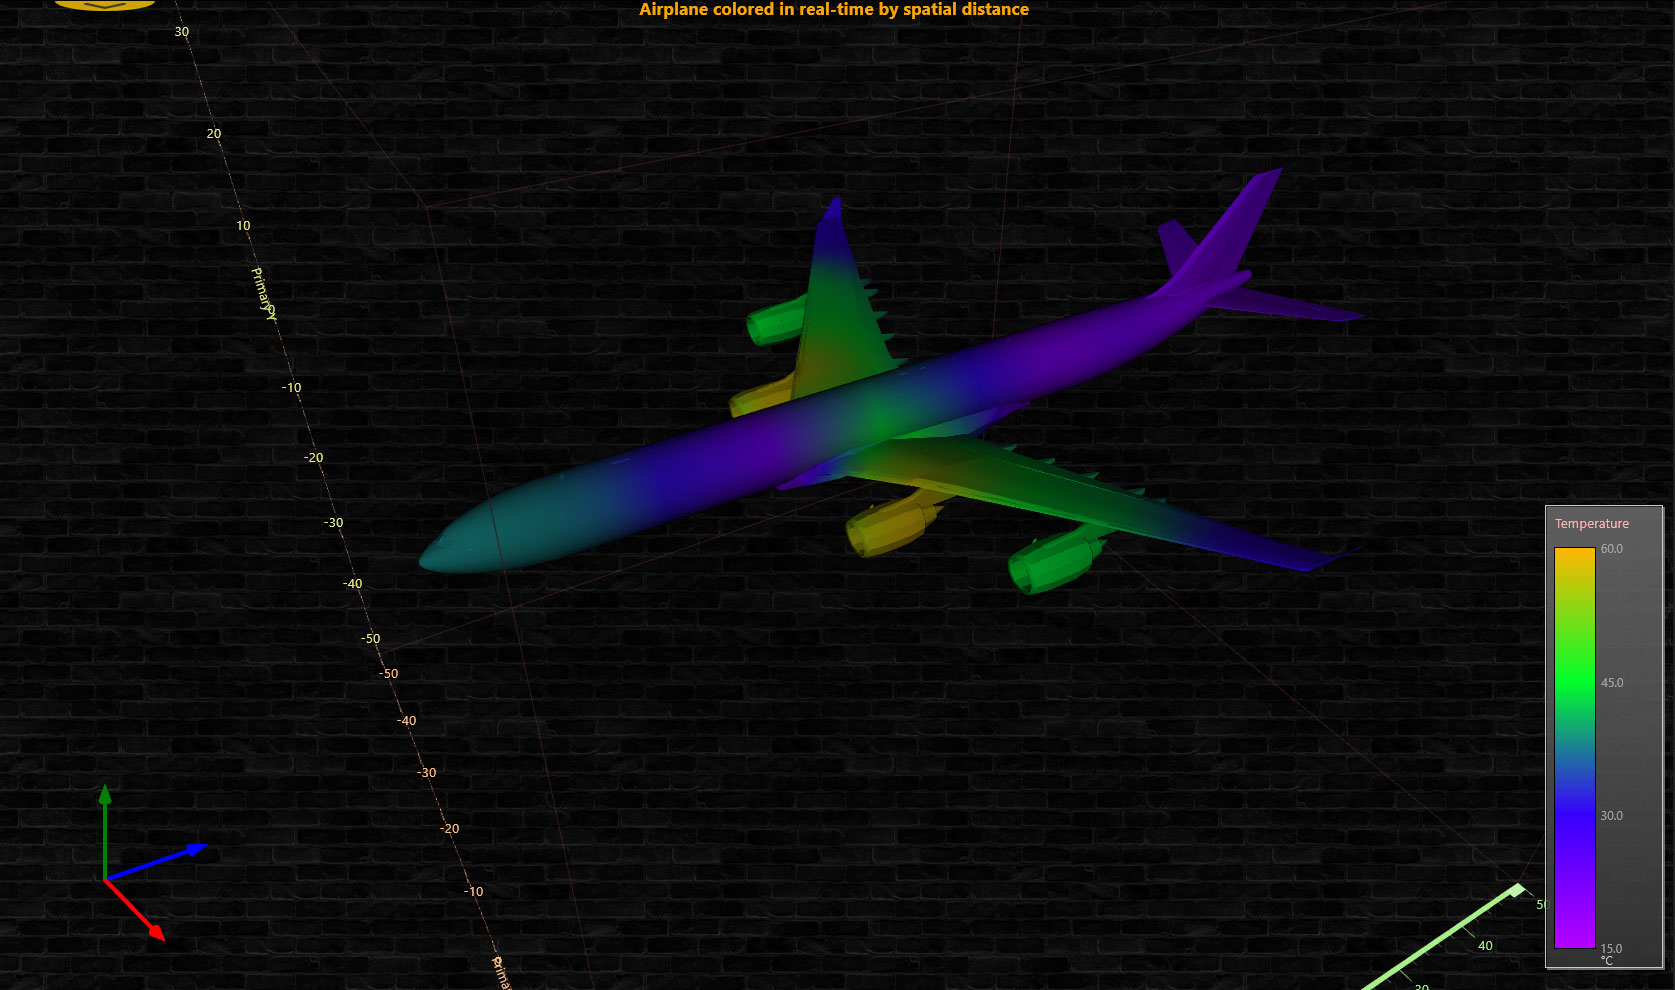 3d mesh model real-time coloring application of an airplane